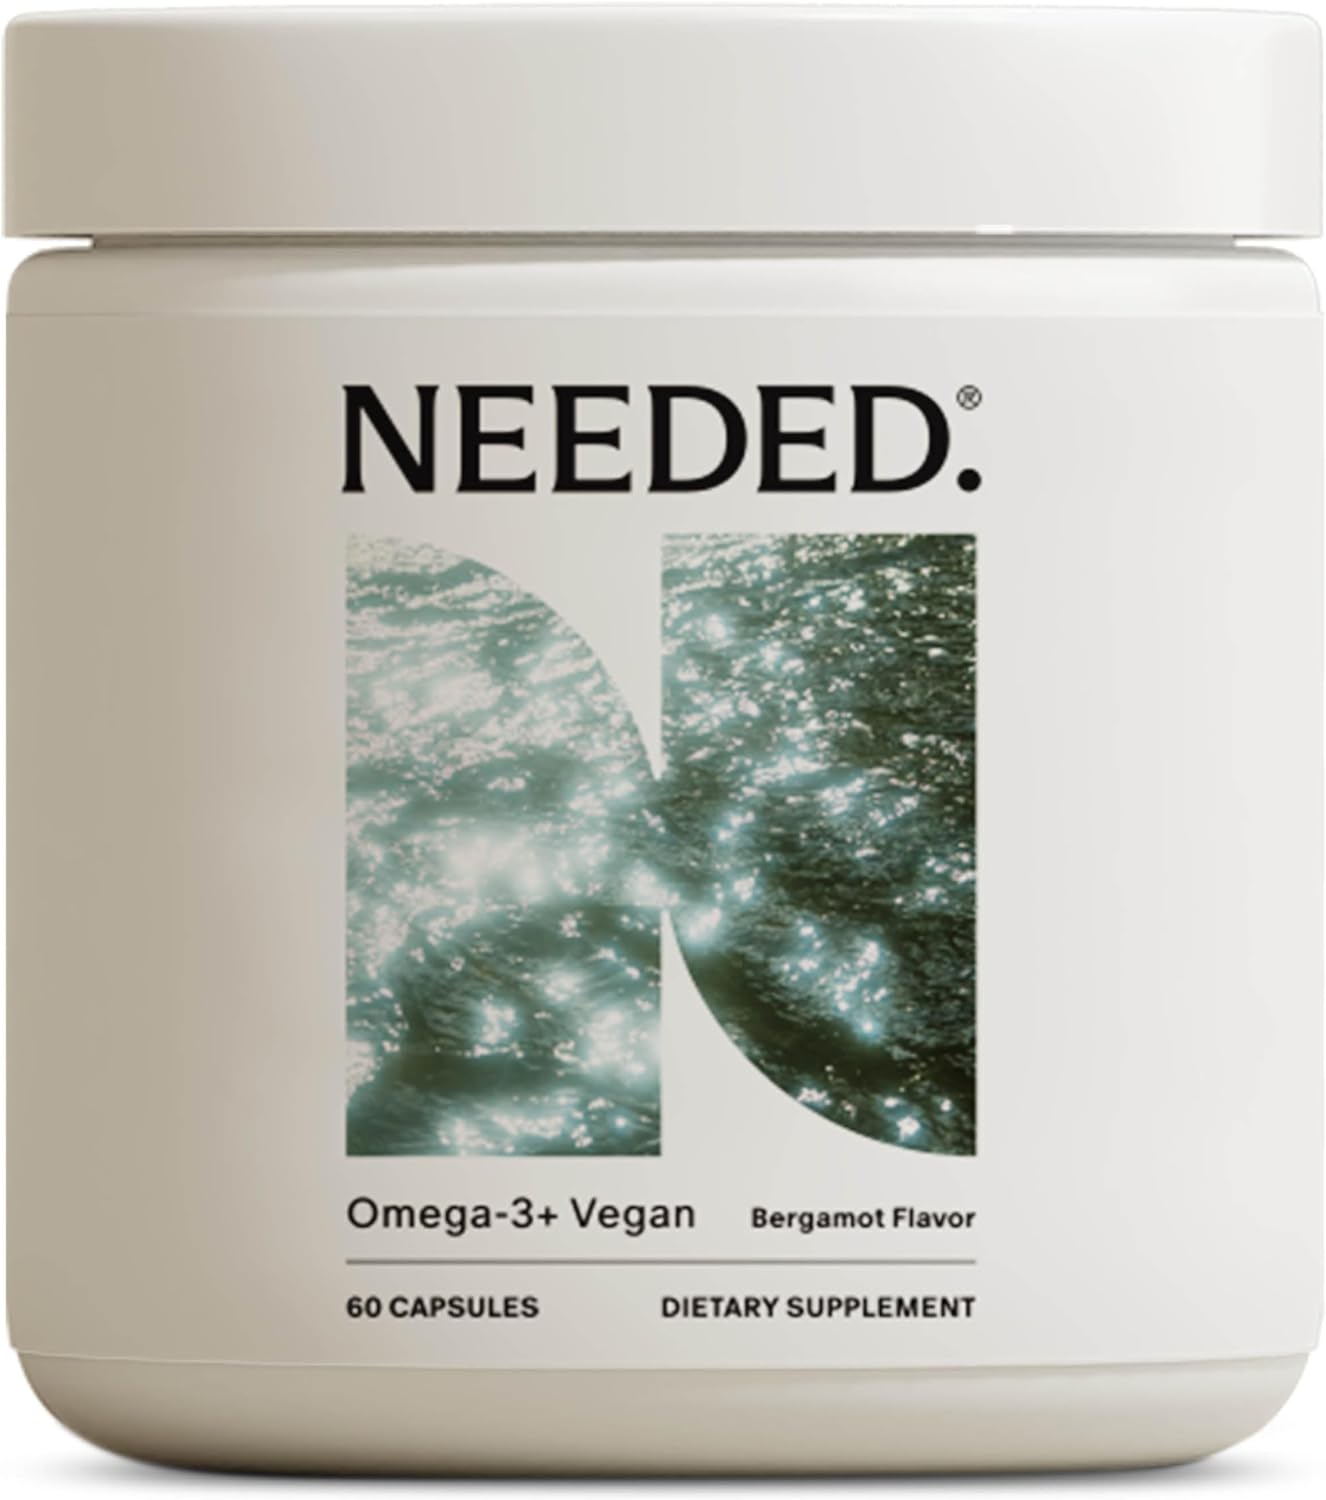 Needed. Expertly-Formulated & Tested Omega-3+ Capsules for Prenatal, Pregnancy, Breastfeeding, & Postpartum | Paired with Synergistic Choline, Lutein, and Zeaxanthin | 60 Capsules